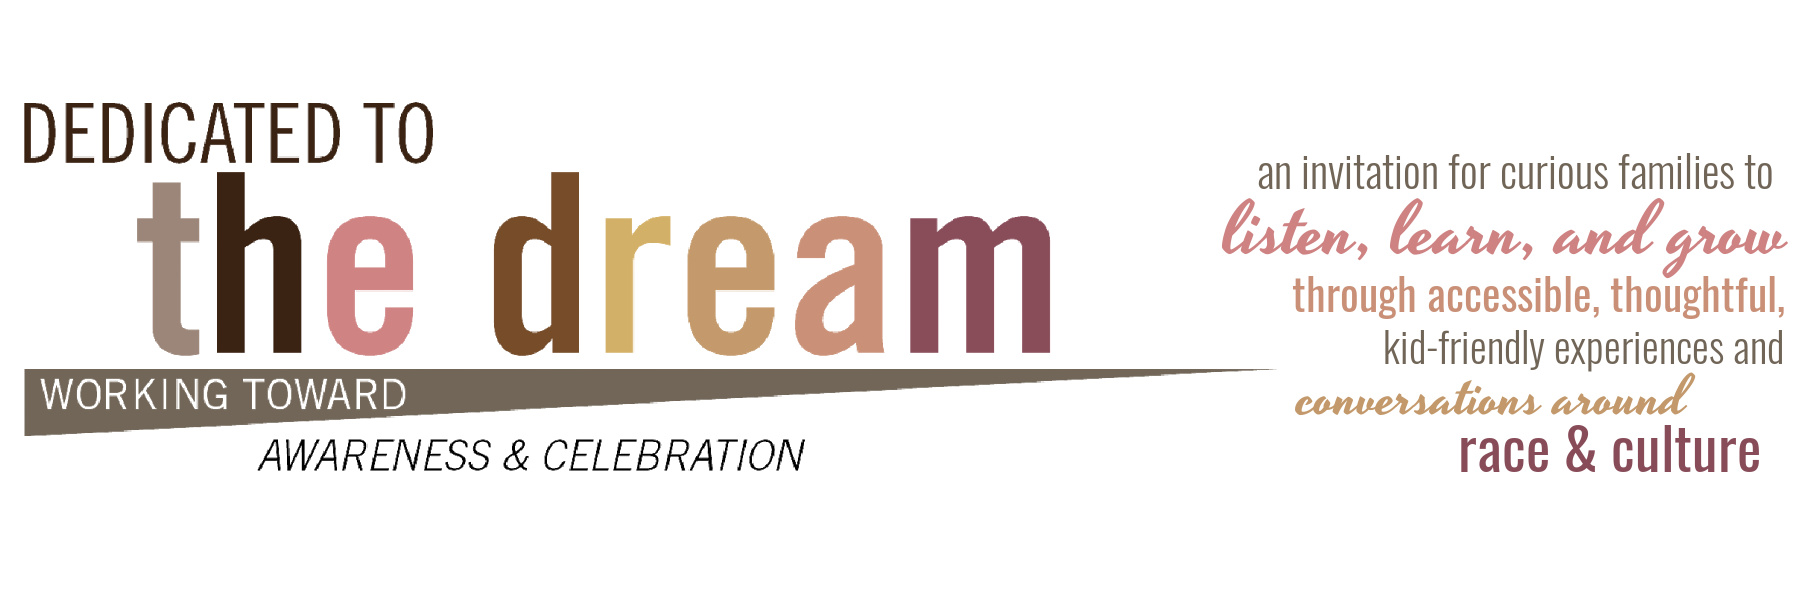 Dedicated to the dream: working toward awareness and celebration...an invitation for curious families to listen, learn, and grow through accessible, thoughtful, kid-friendly experiences and conversations around race & culture